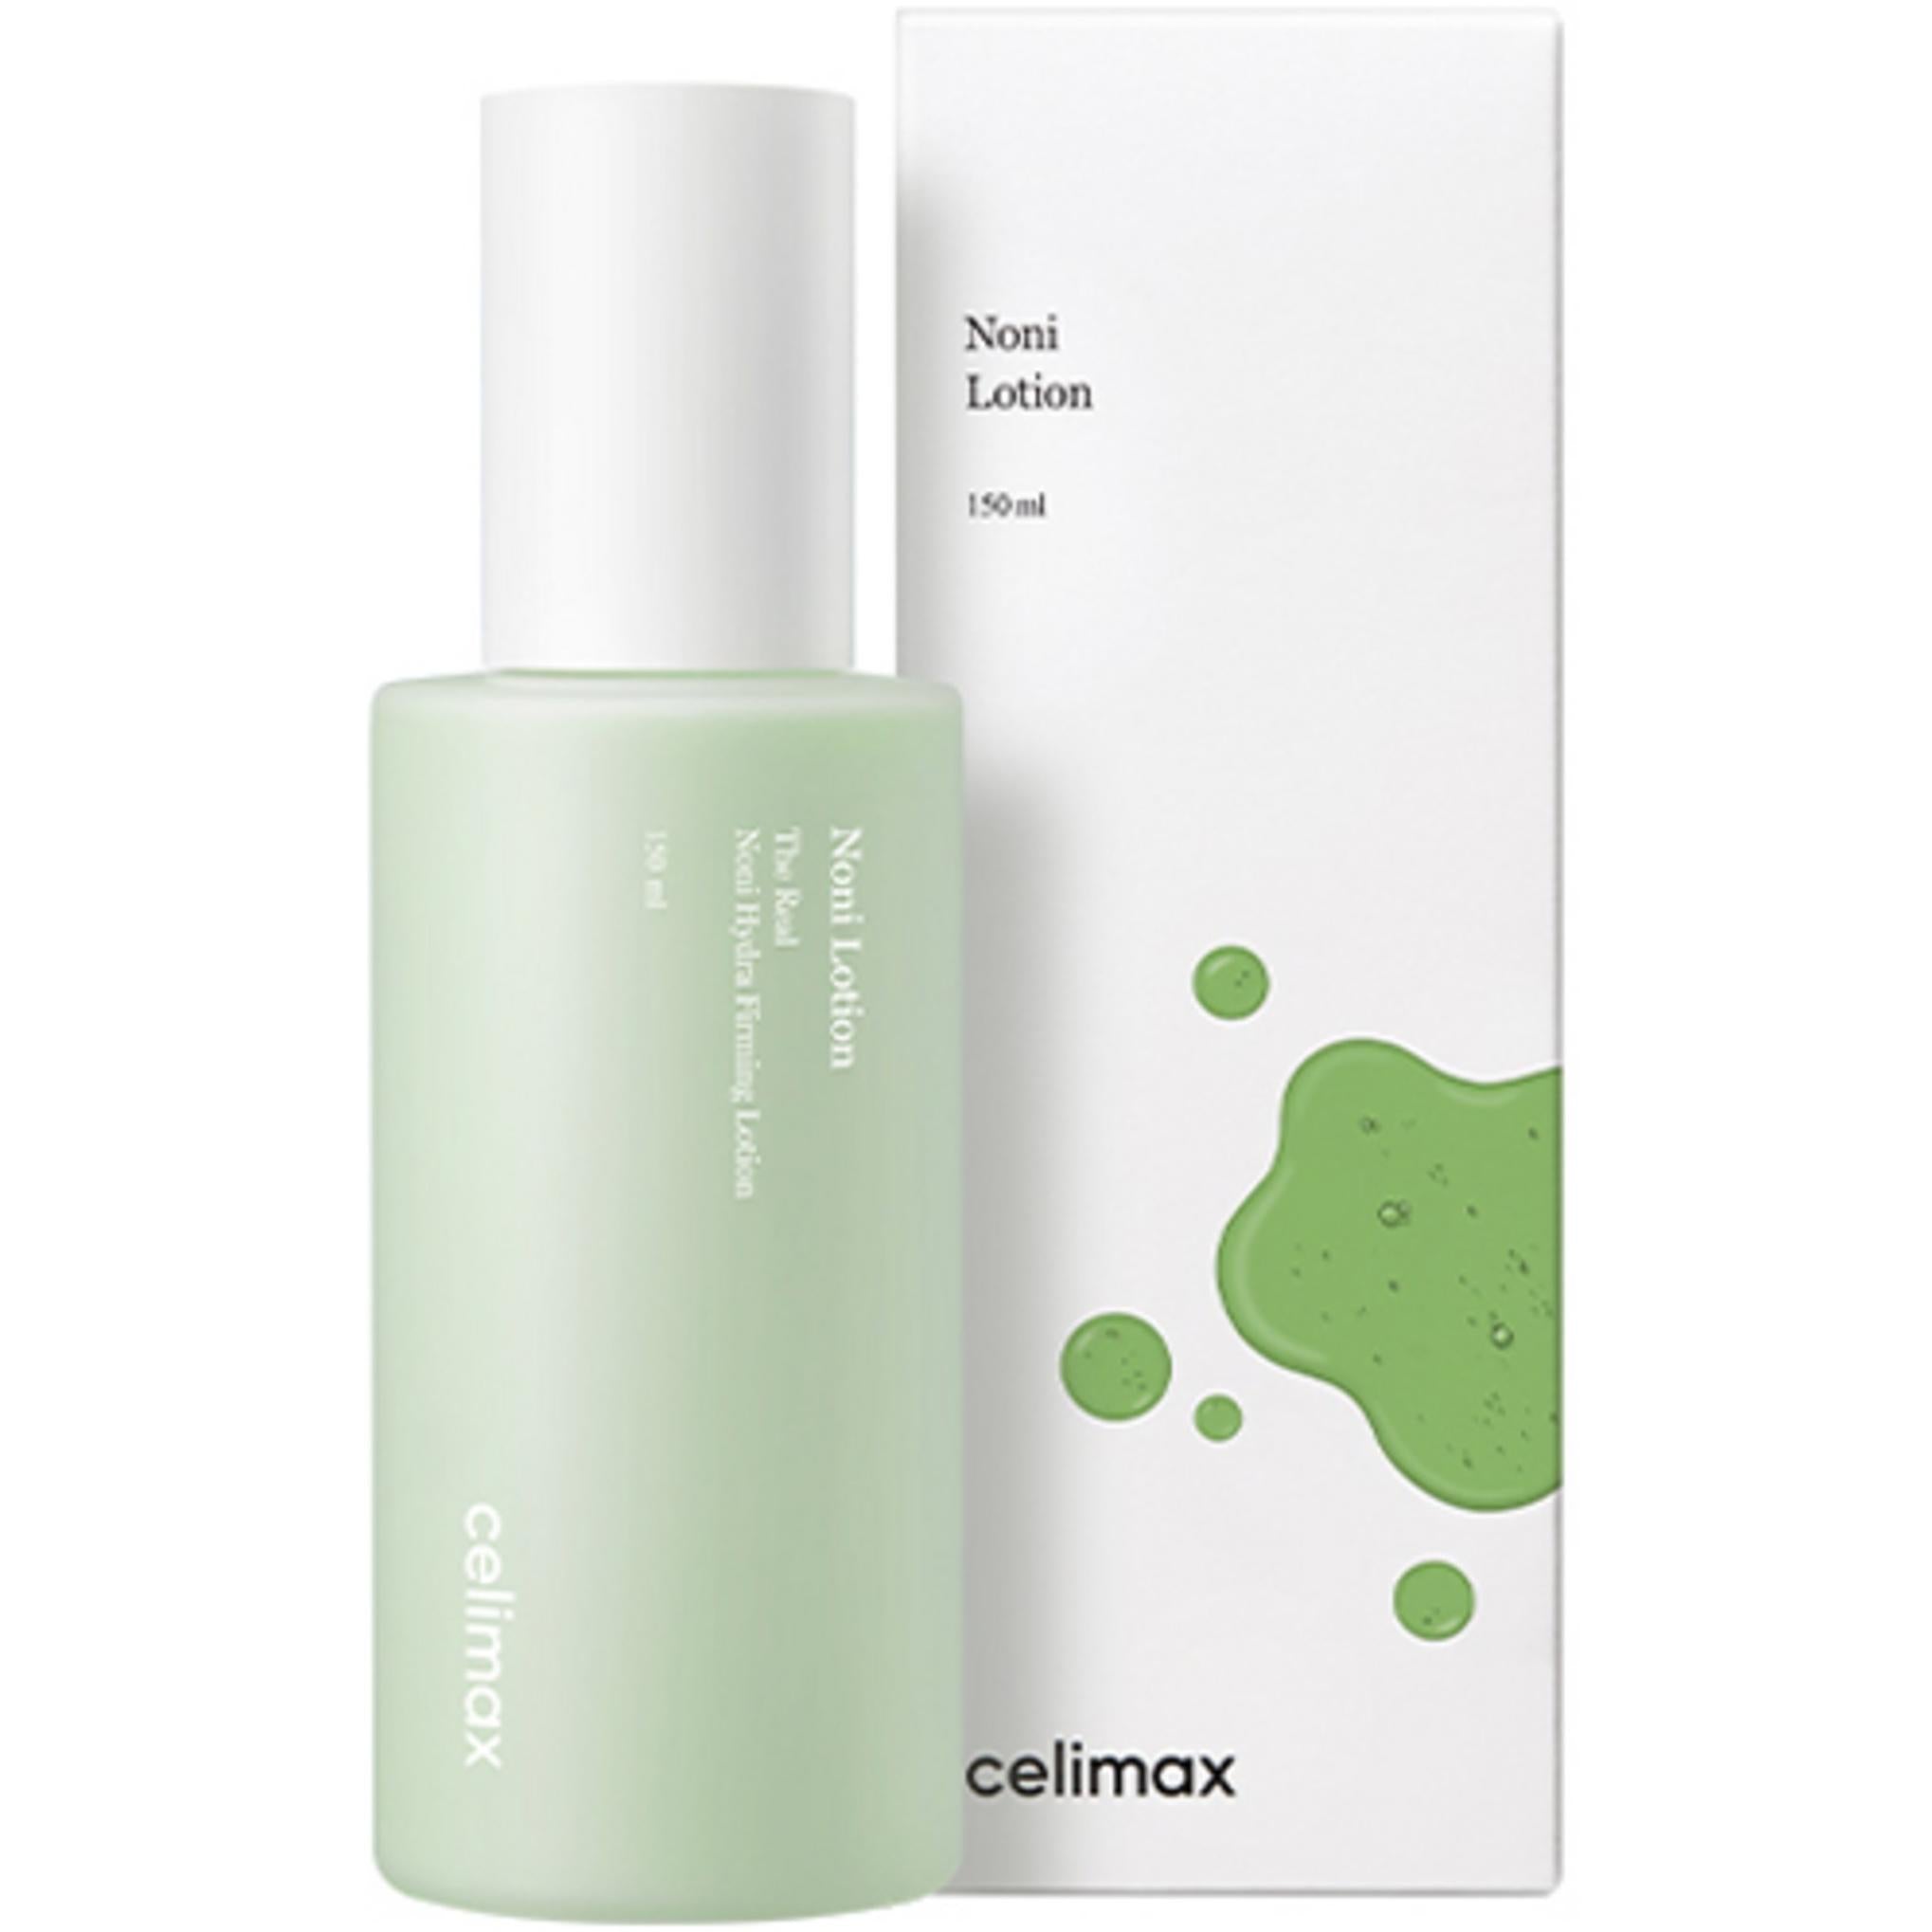 Cellimax The Real Noni Hydra Firming Lotion